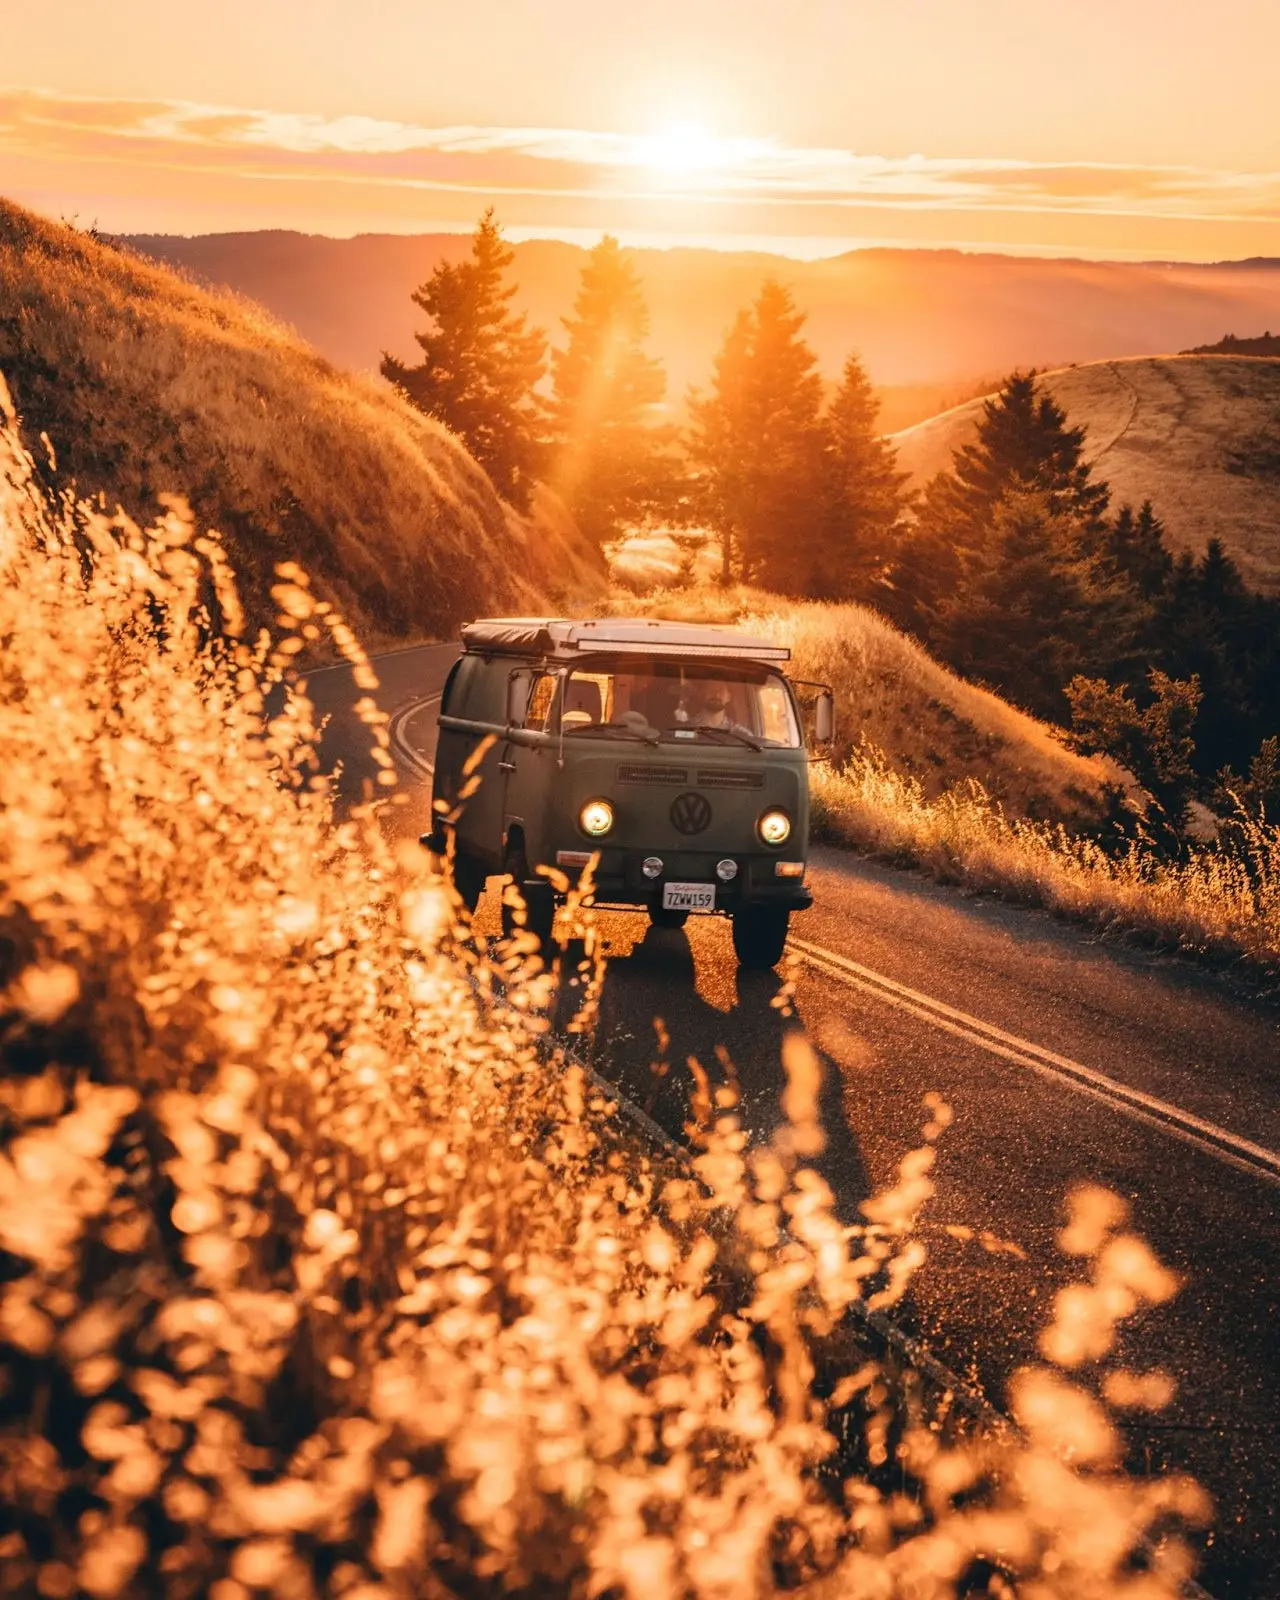 An old VW van ascends a curvy road during the golden hour at Mount Tamalpais just north of San Francisco, California.